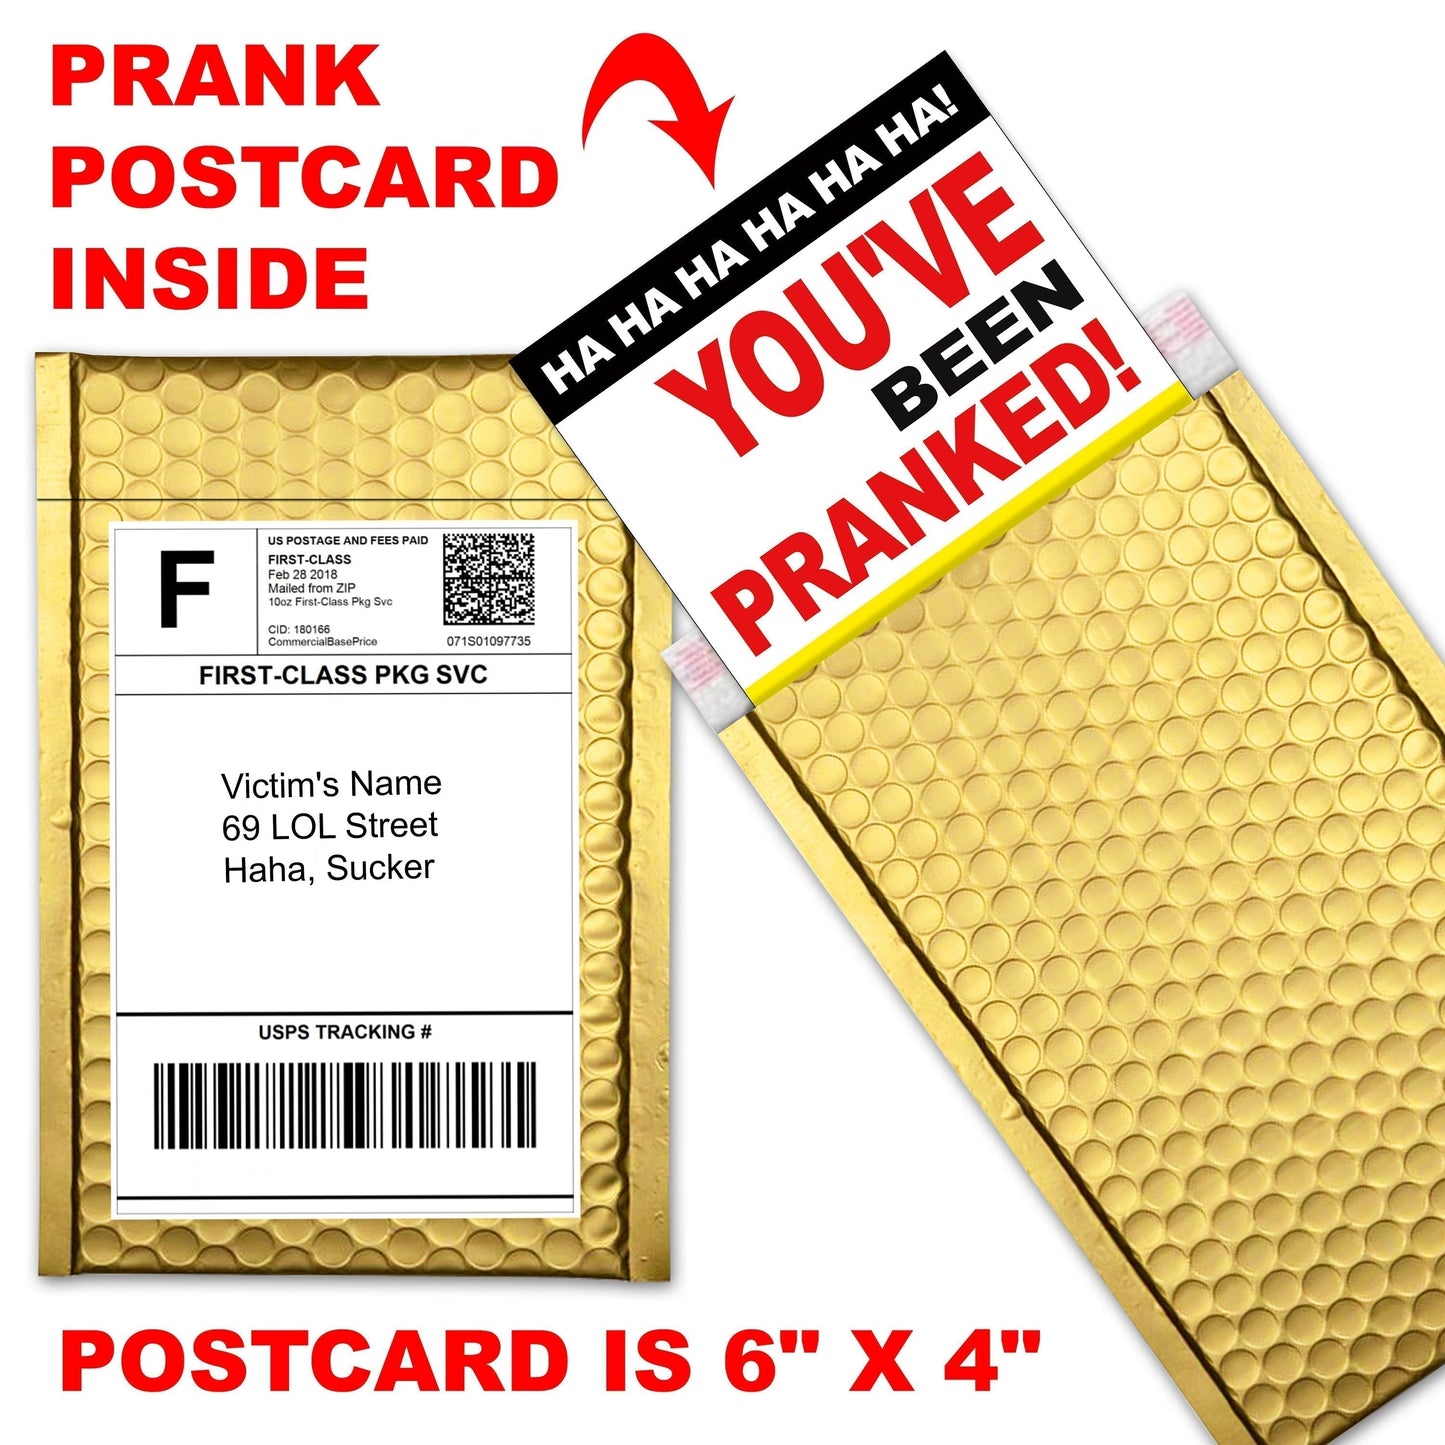 Your Porn Subscription Has Expired Prank Mailer